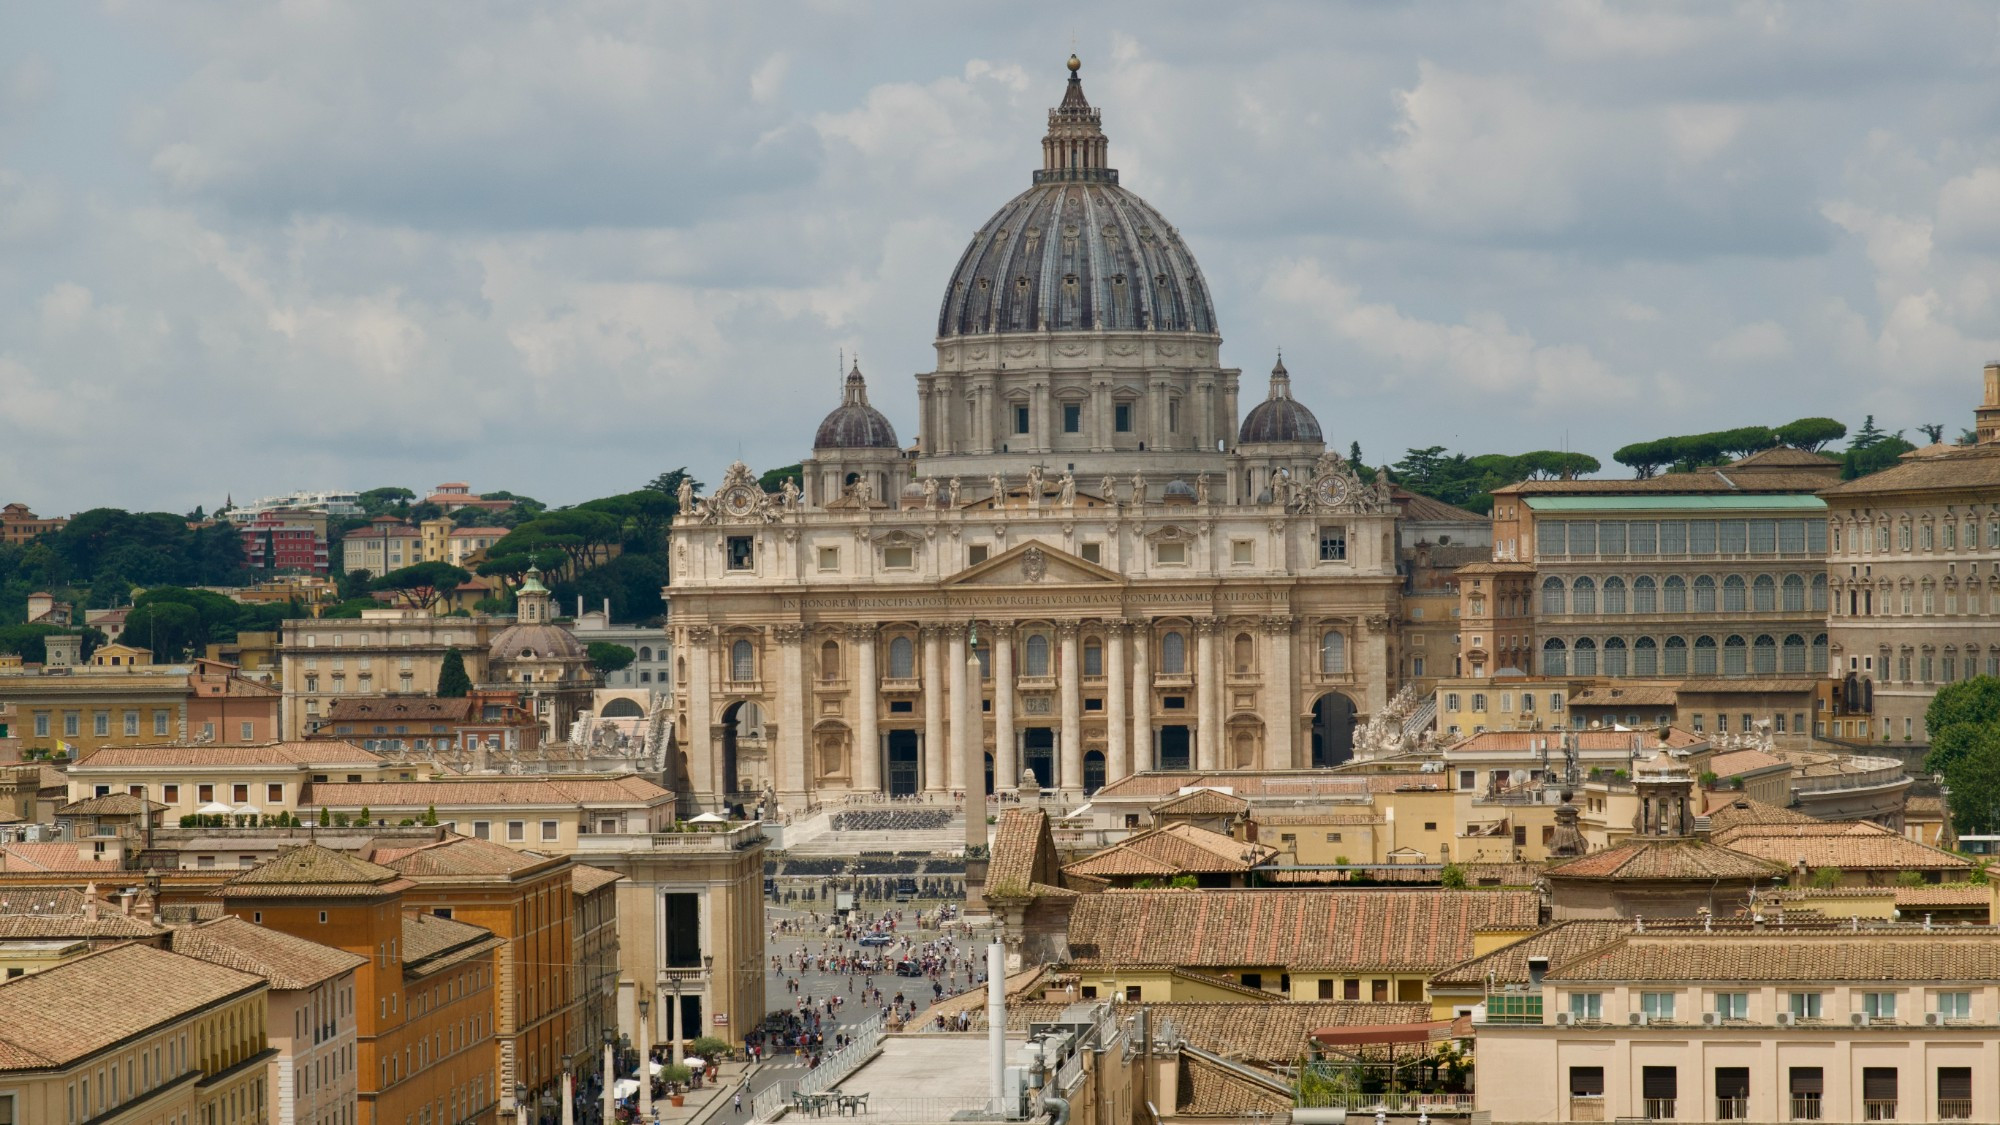 St. Peter's Basilica, Italy